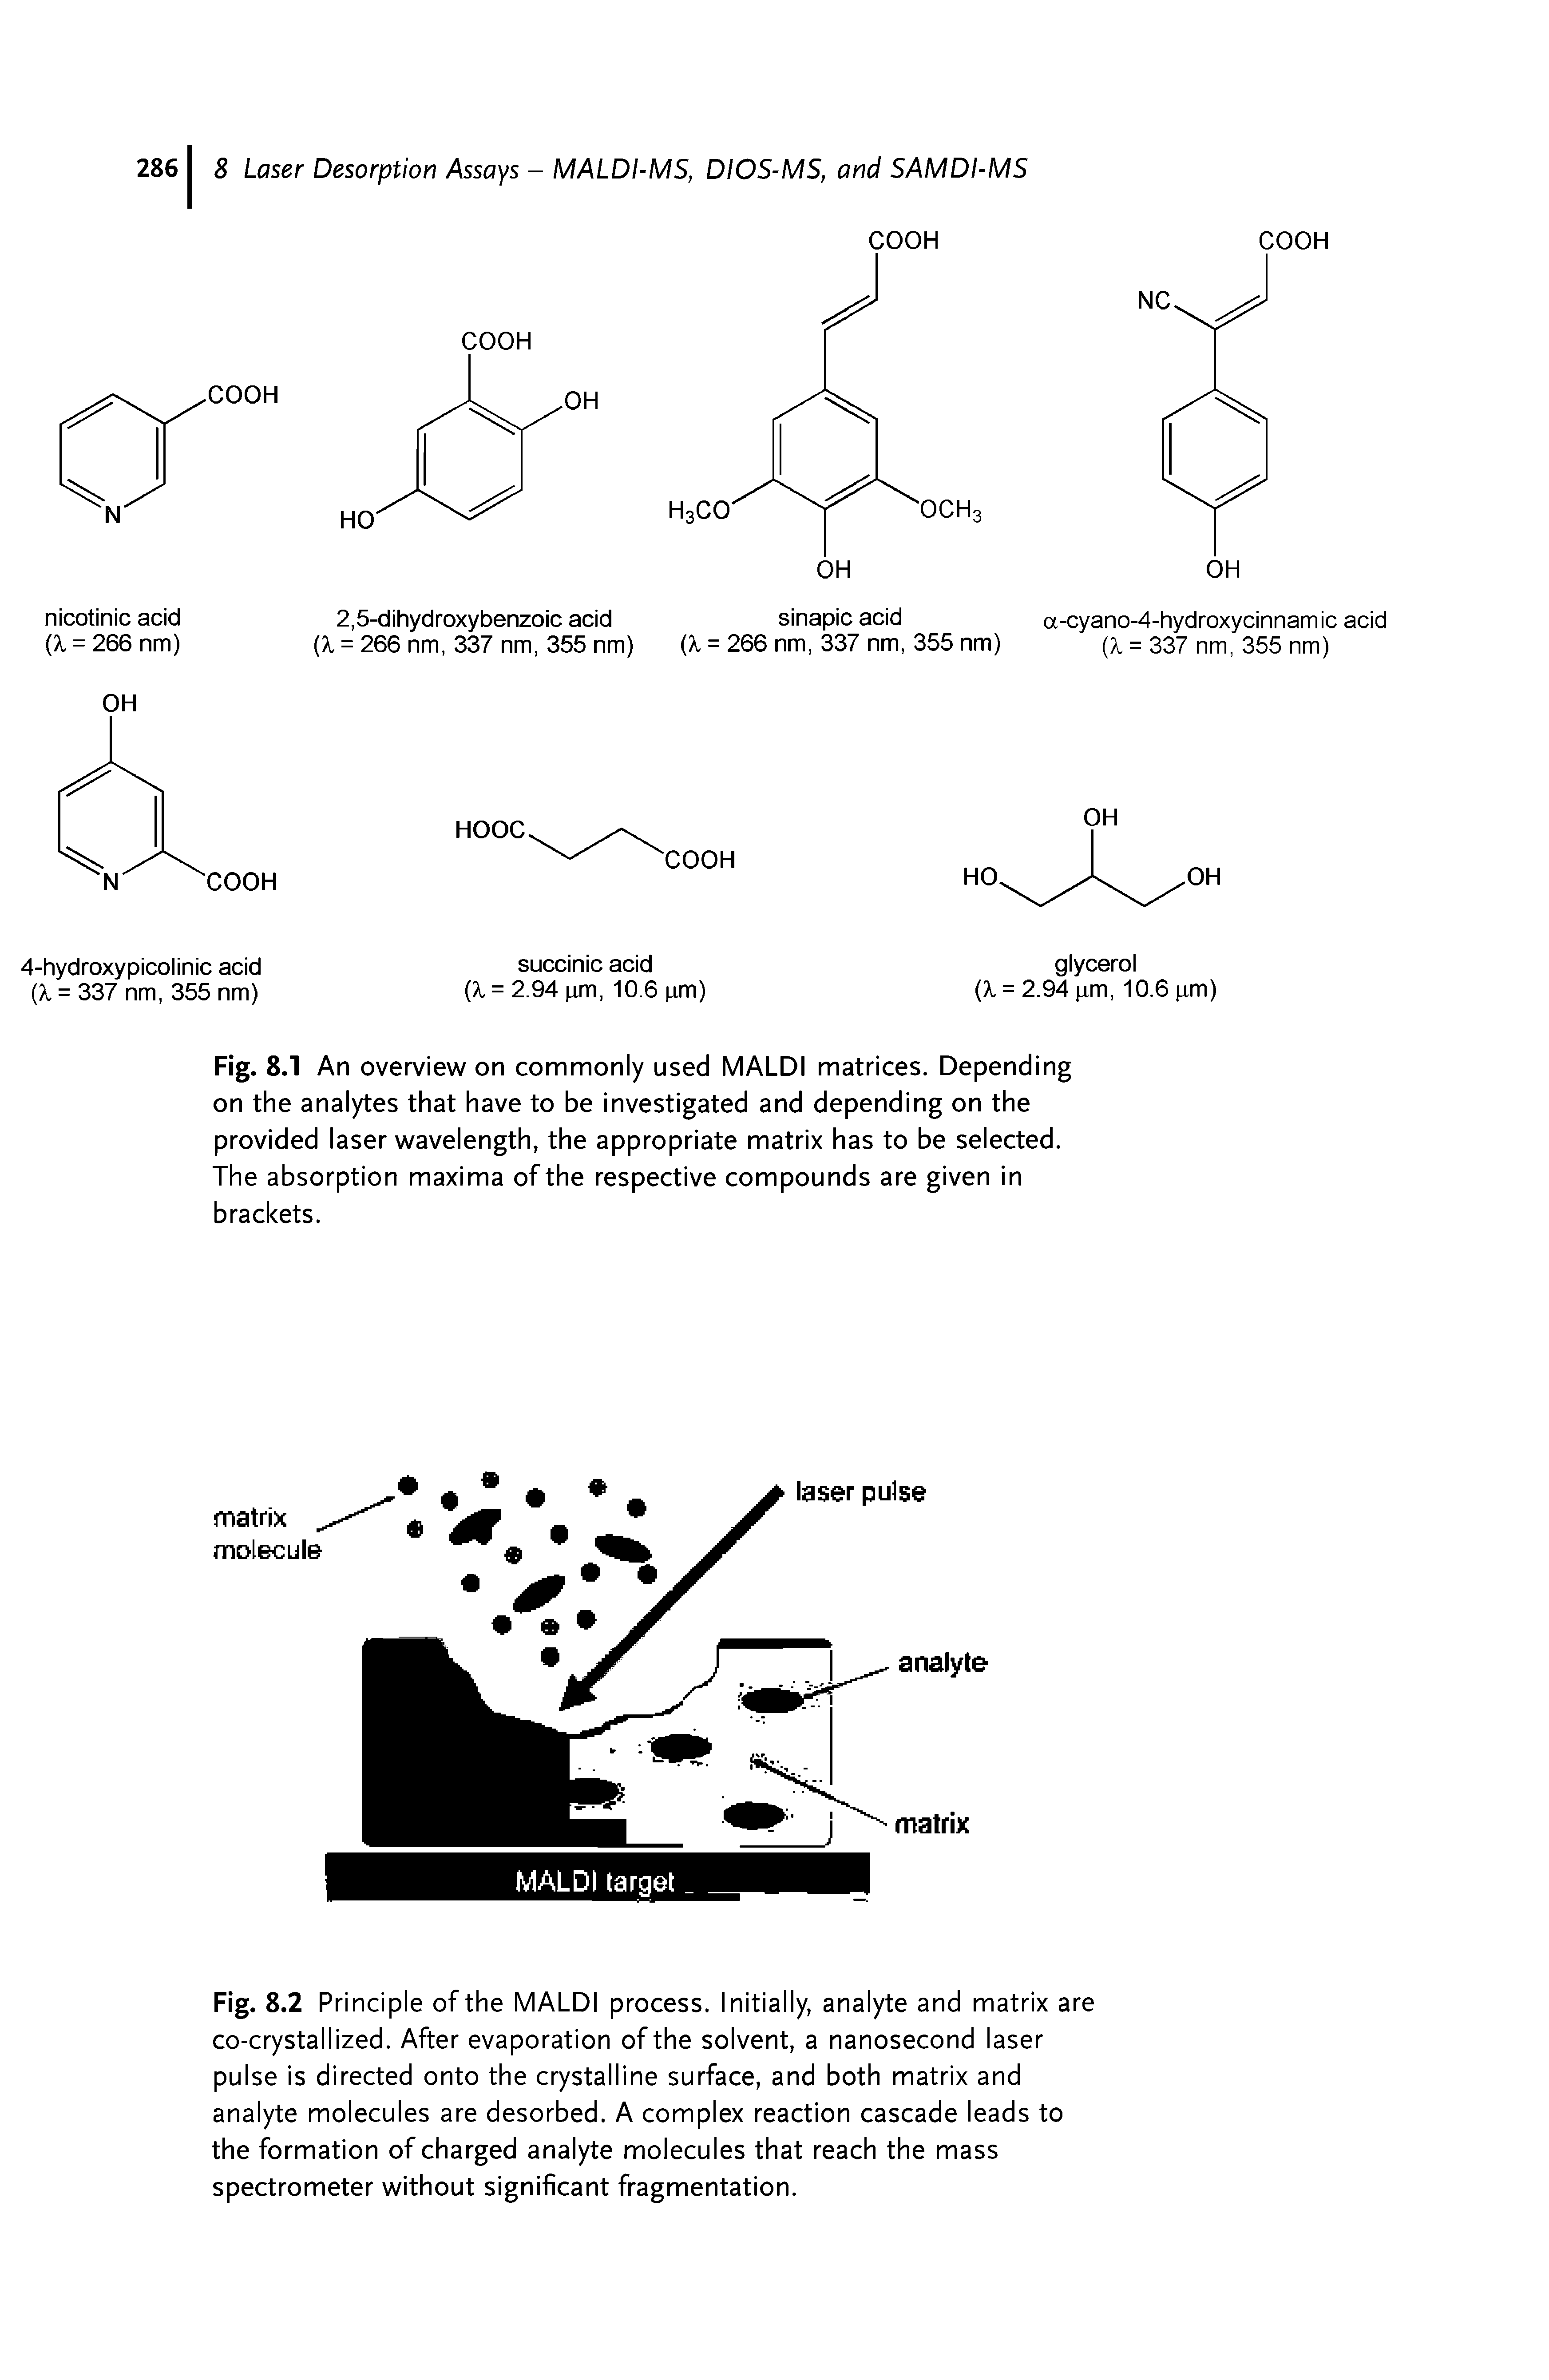 Fig. 8.1 An overview on commonly used MALDI matrices. Depending on the analytes that have to be investigated and depending on the provided laser wavelength, the appropriate matrix has to be selected. The absorption maxima of the respective compounds are given in brackets.